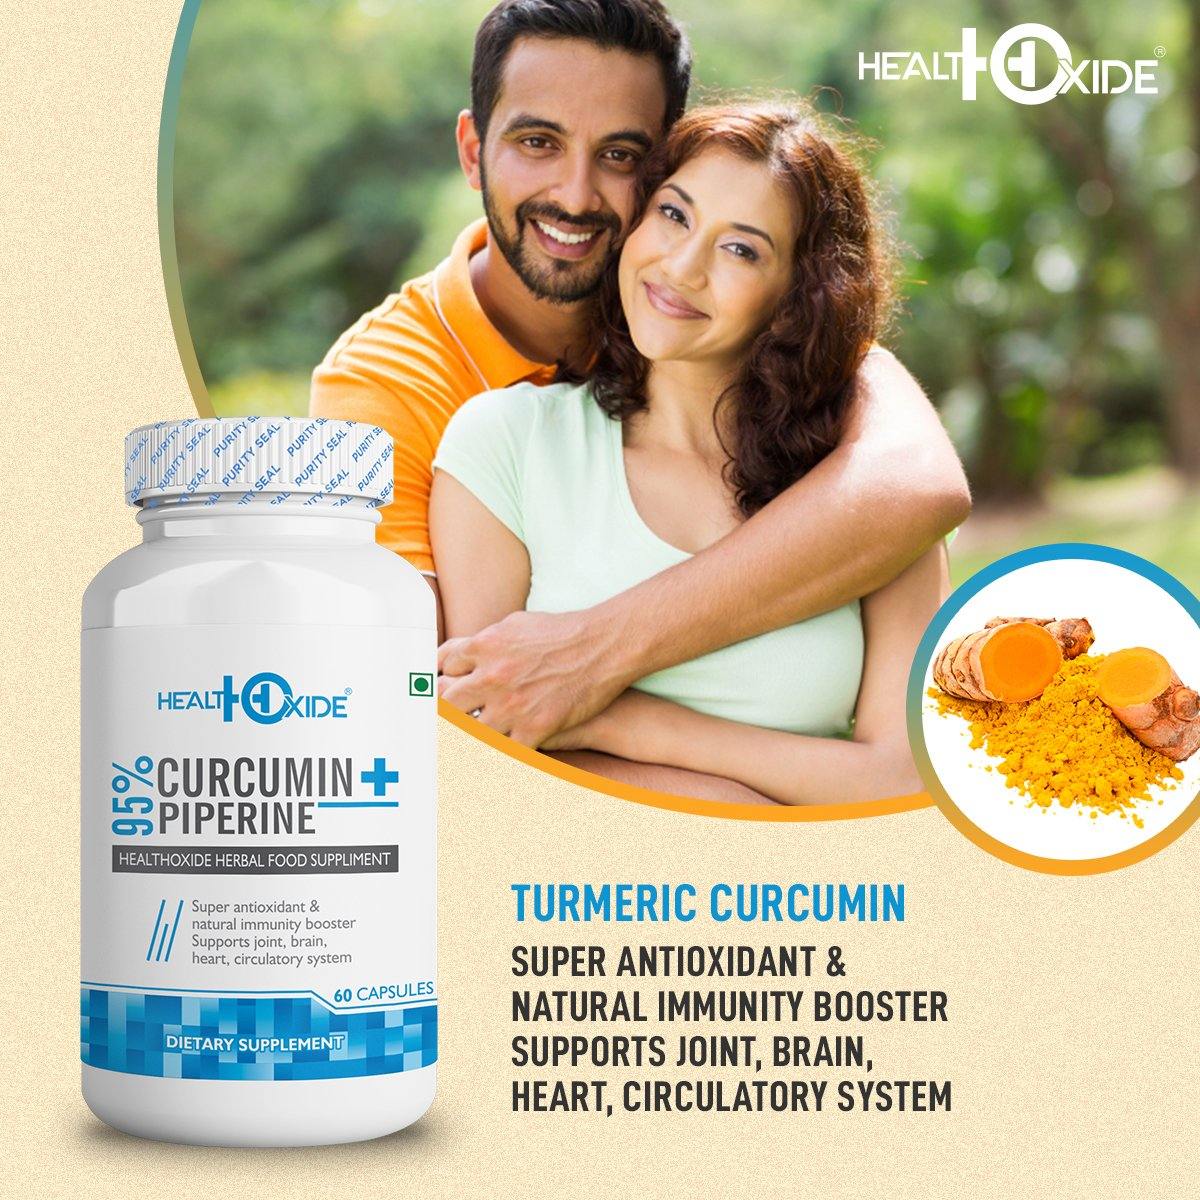 curcumin and piperine tablets uses